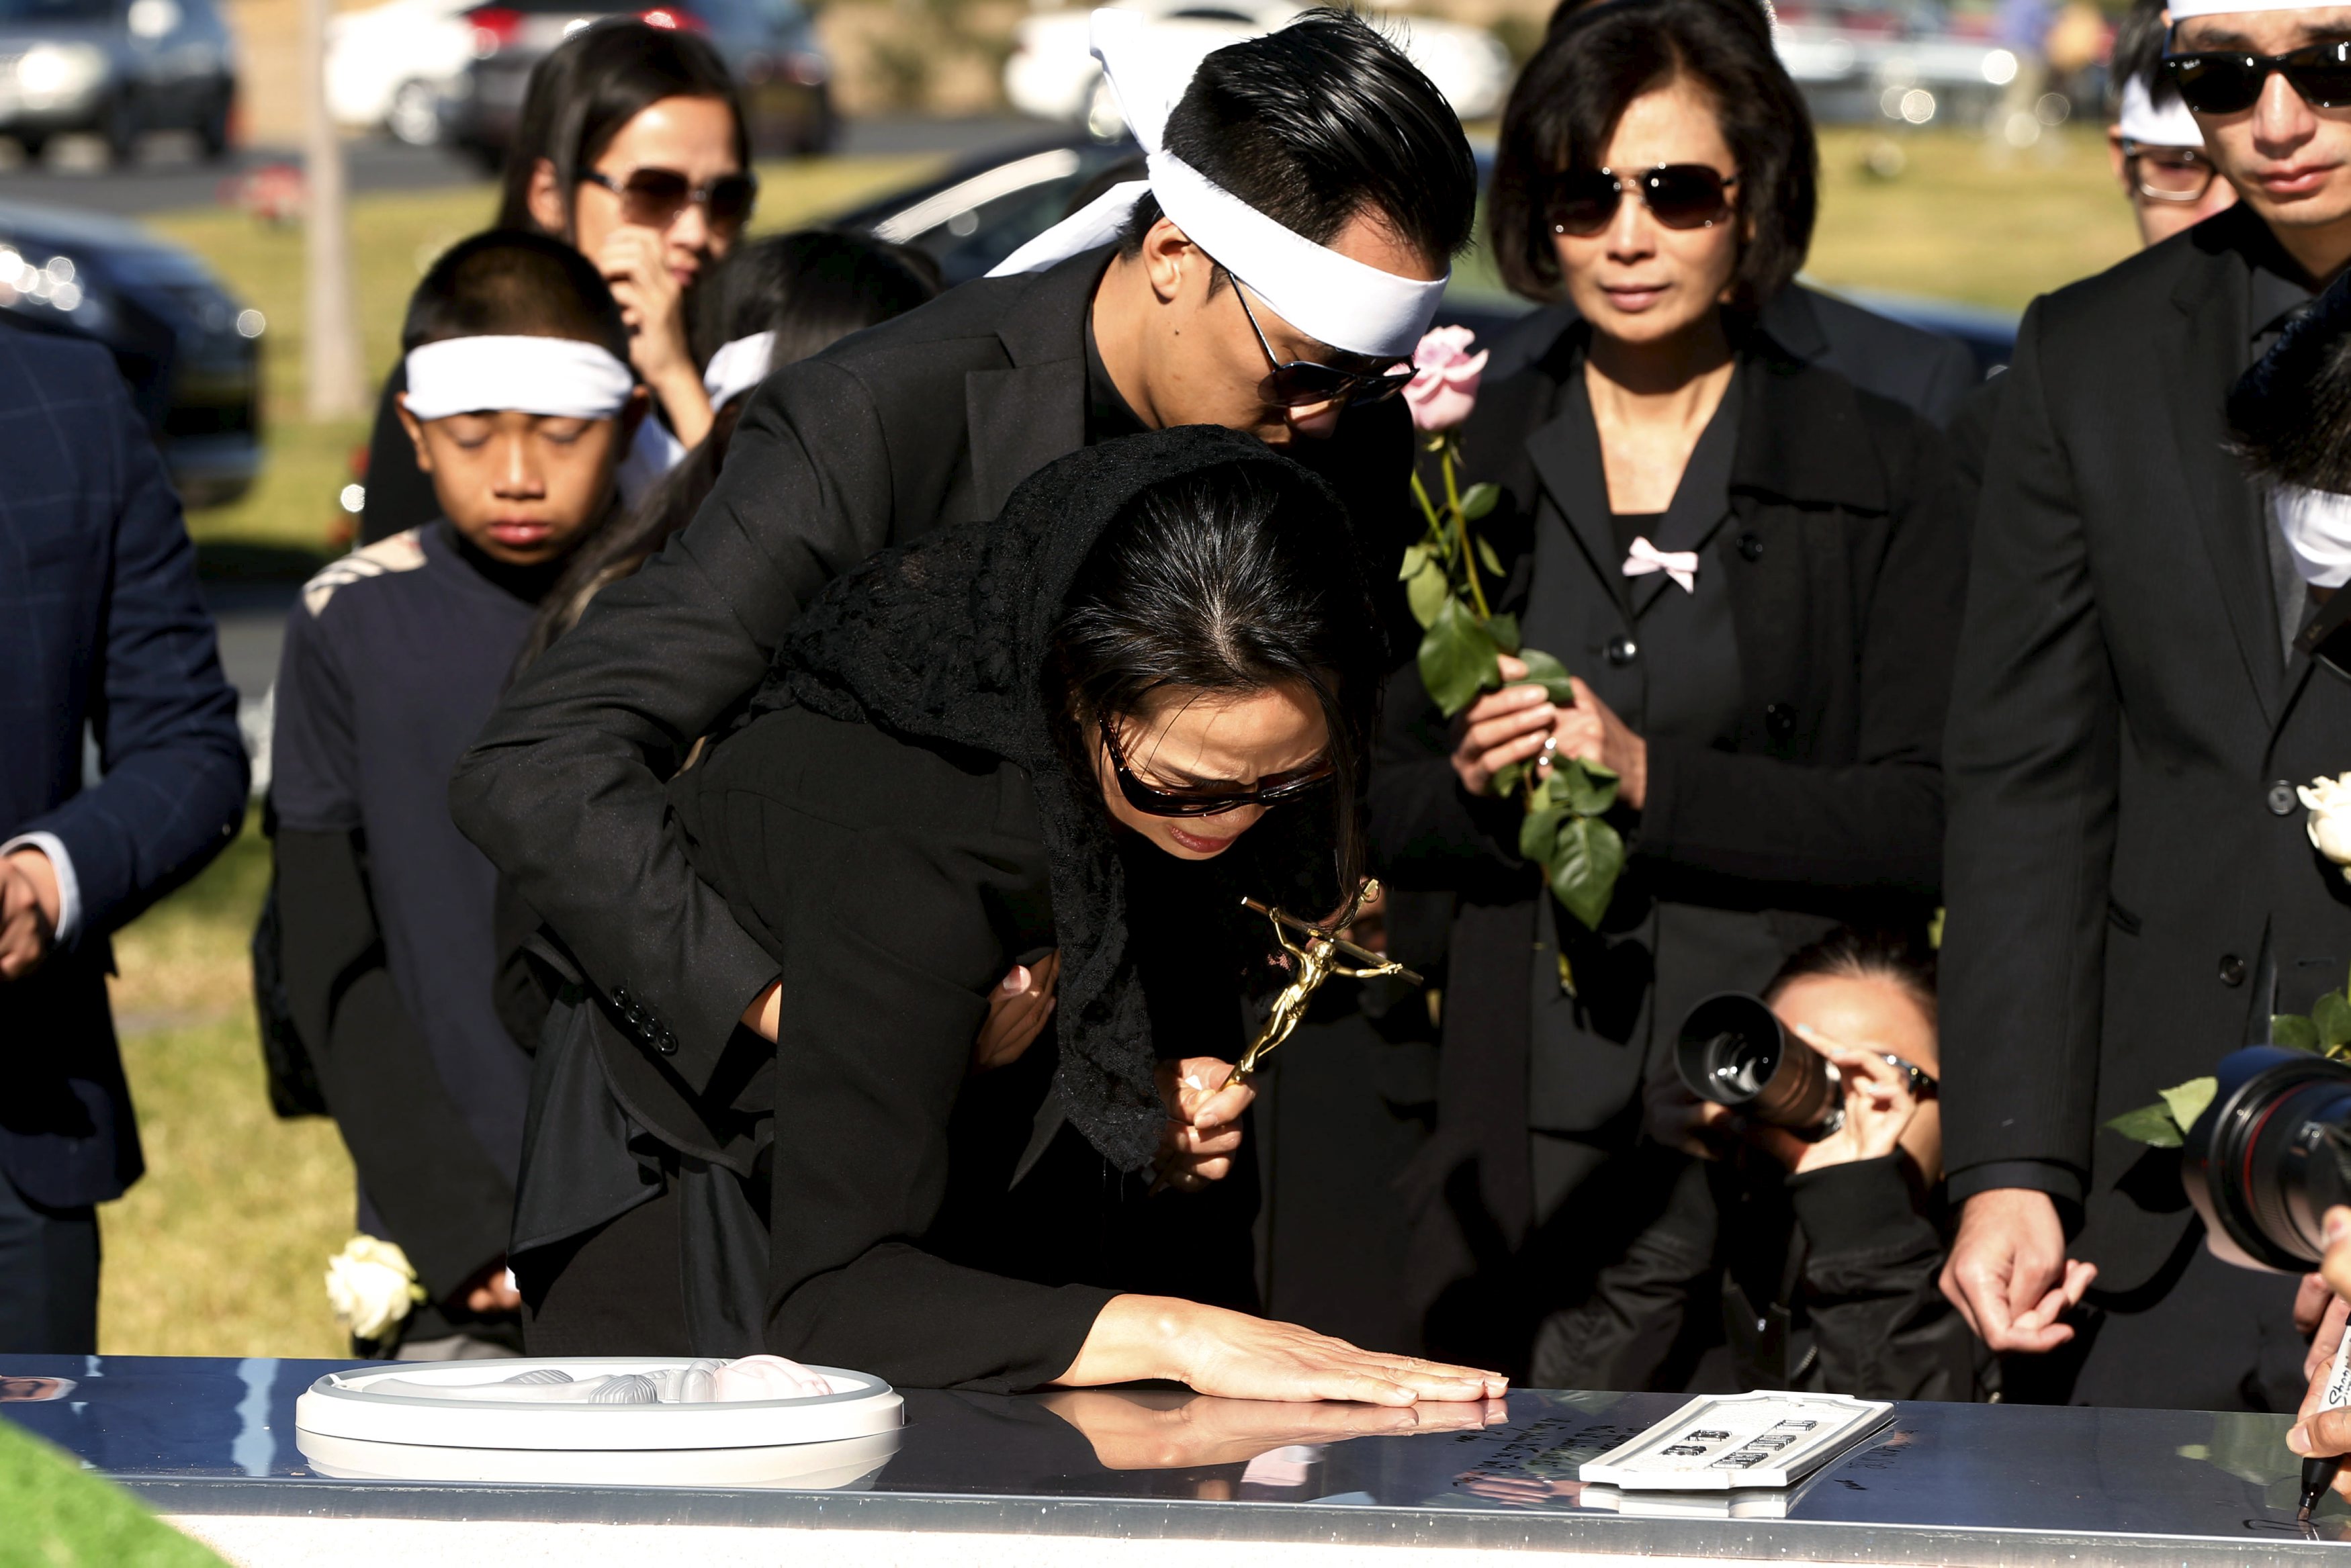 Van Thanh Nguyen touches the burial vault of her daughter, Tin Nguyen, during her Dec. 12 burial at Good Shepherd Cemetery in Huntington Beach, Calif. (CNS/Patrick T. Fallon, Reuters)